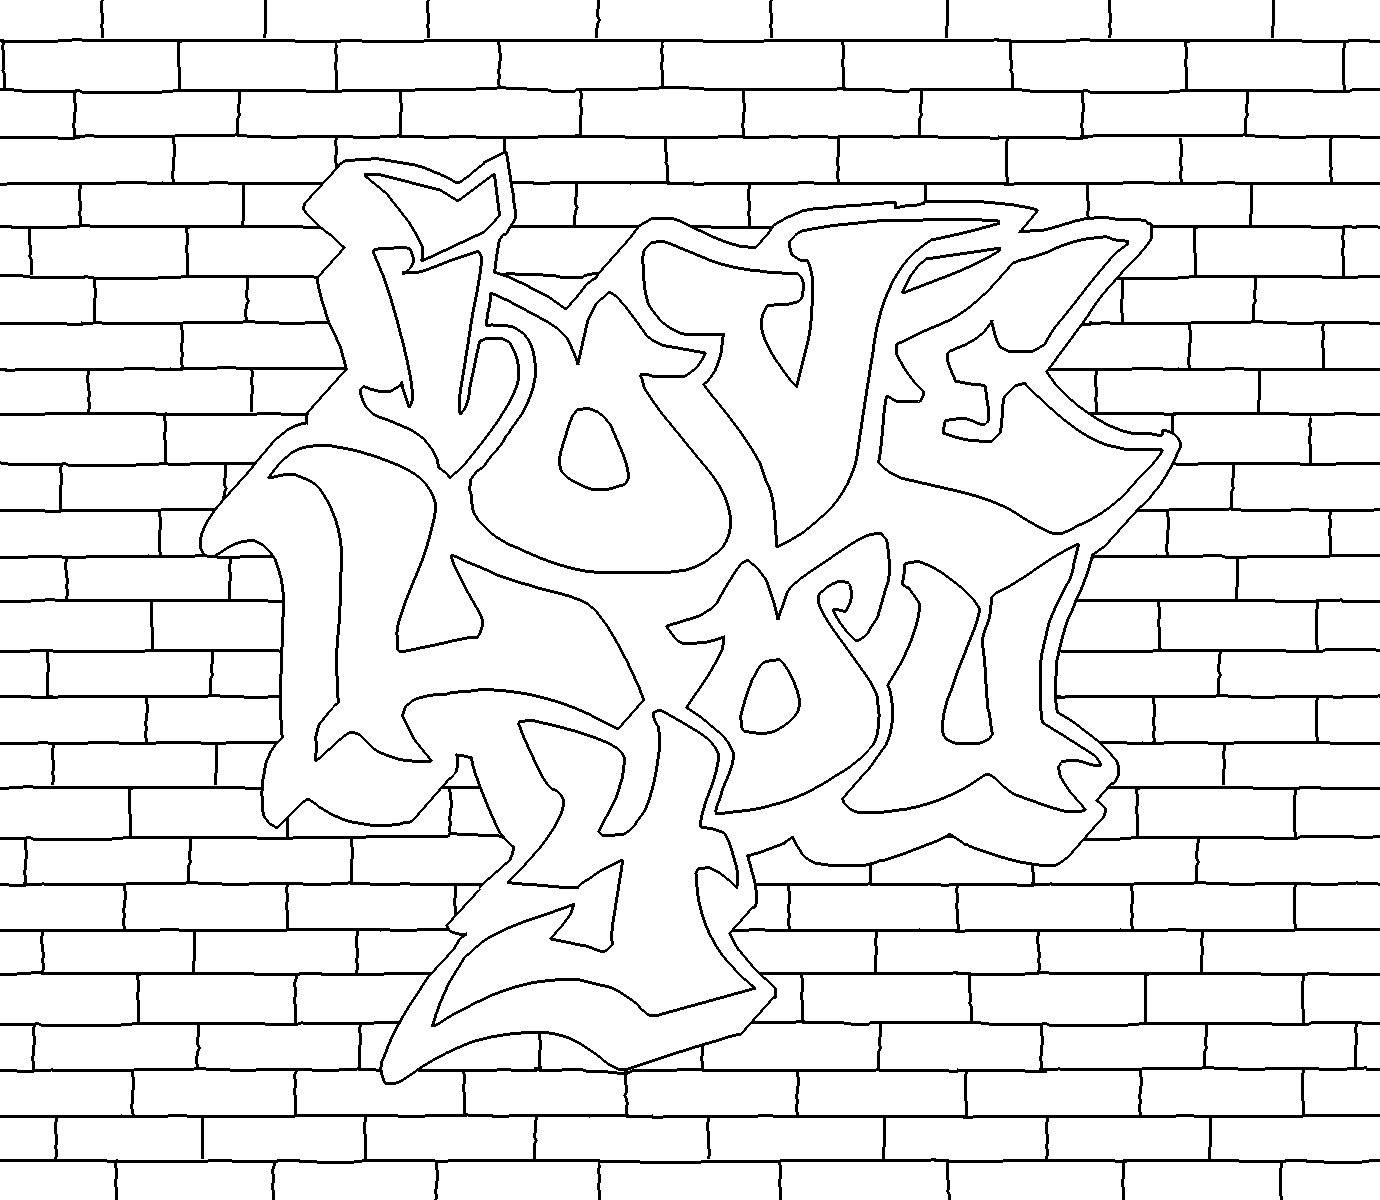 Graffiti Coloring Pages for Teens and Adults - Best Coloring Pages For Kids